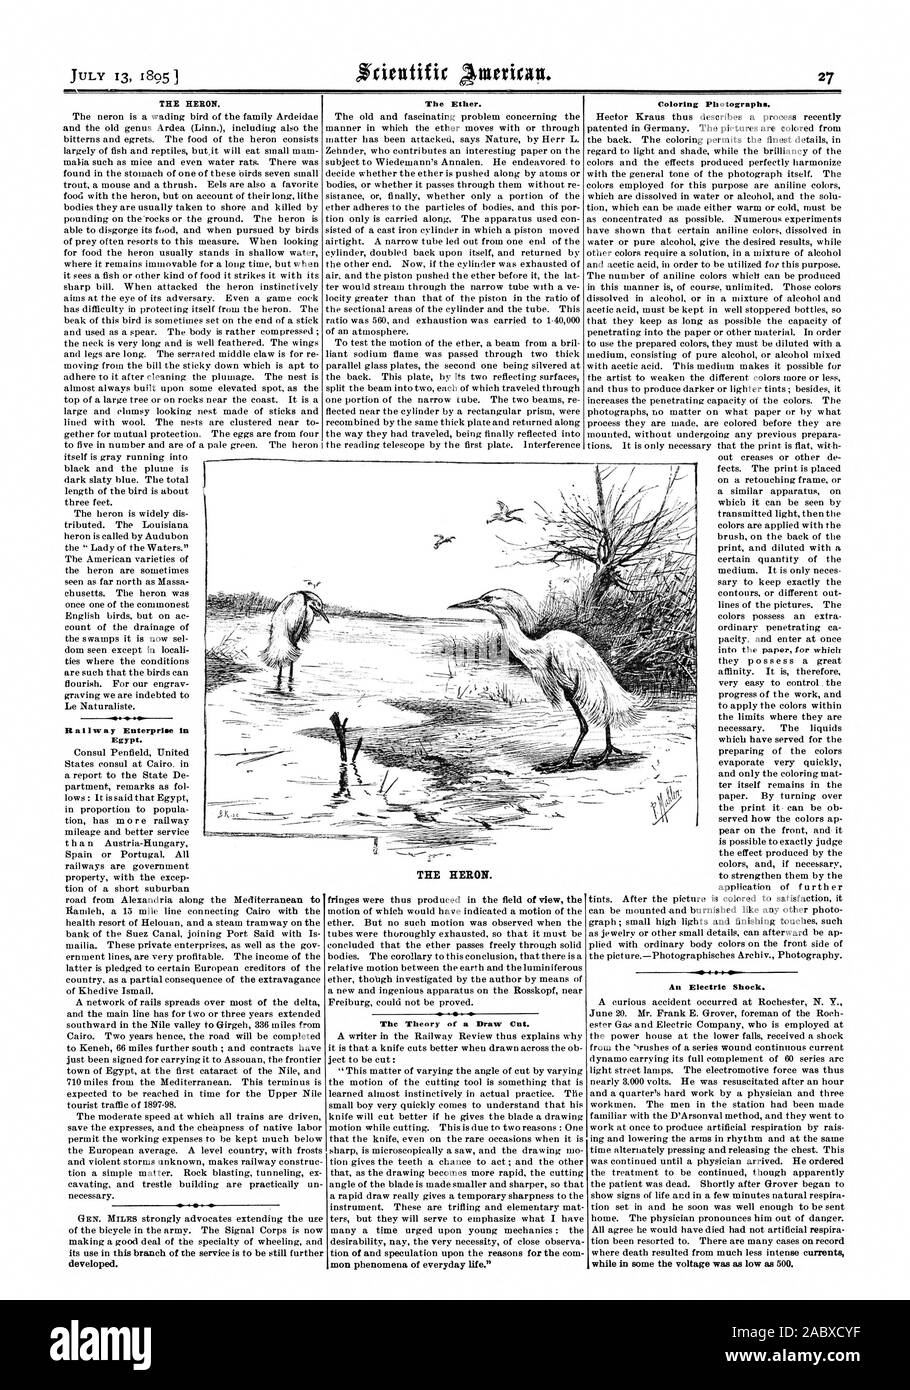 THE HERON. The Ether. Coloring Photographs. Hallway Enterprise in Egypt. THE HERON. The Theory of a Draw Cut. An Electric Shock. while in some the voltage was as low as 500., scientific american, 1895-07-13 Stock Photo